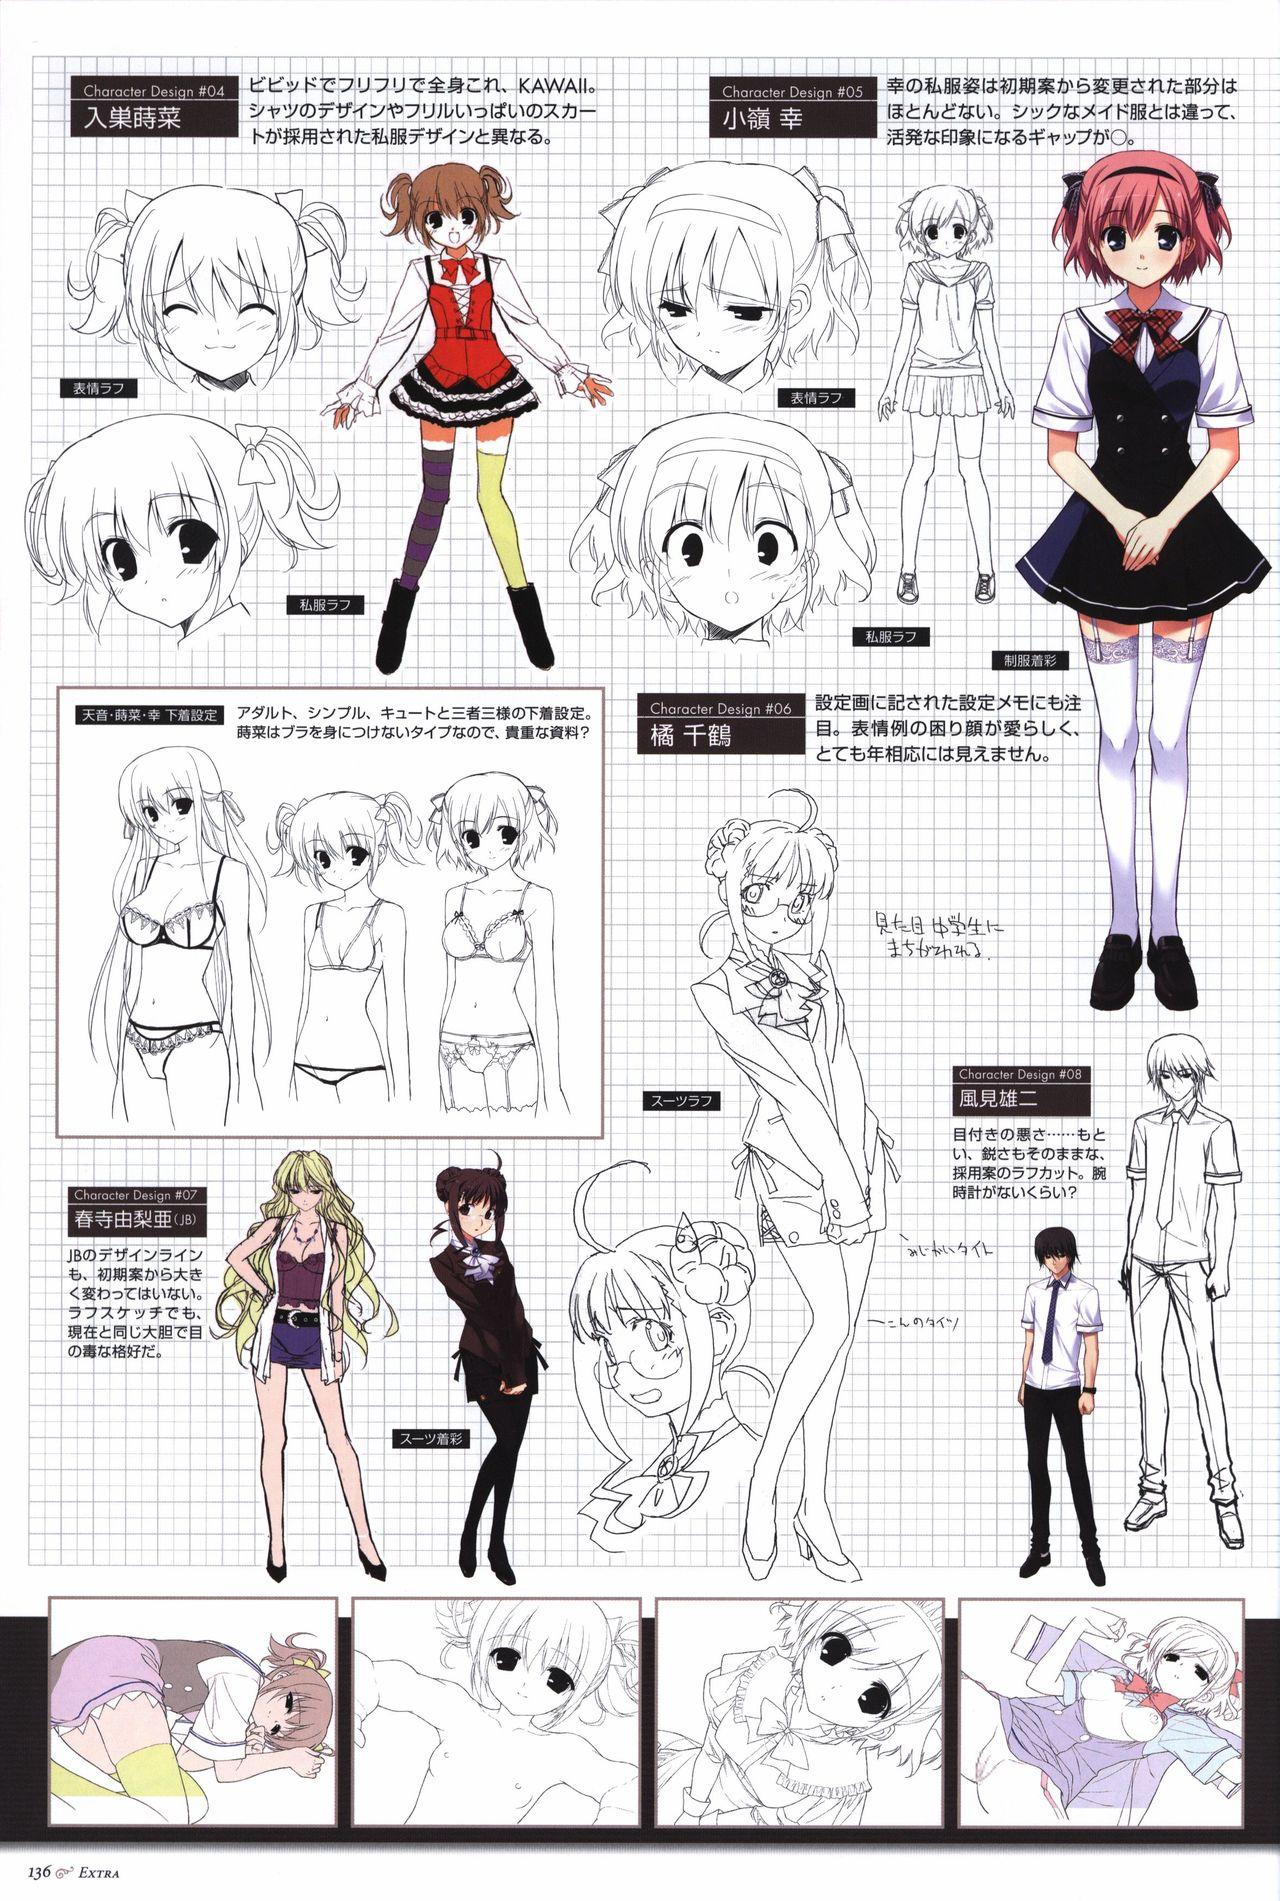 The Fruit of Grisaia Visual FanBook 136